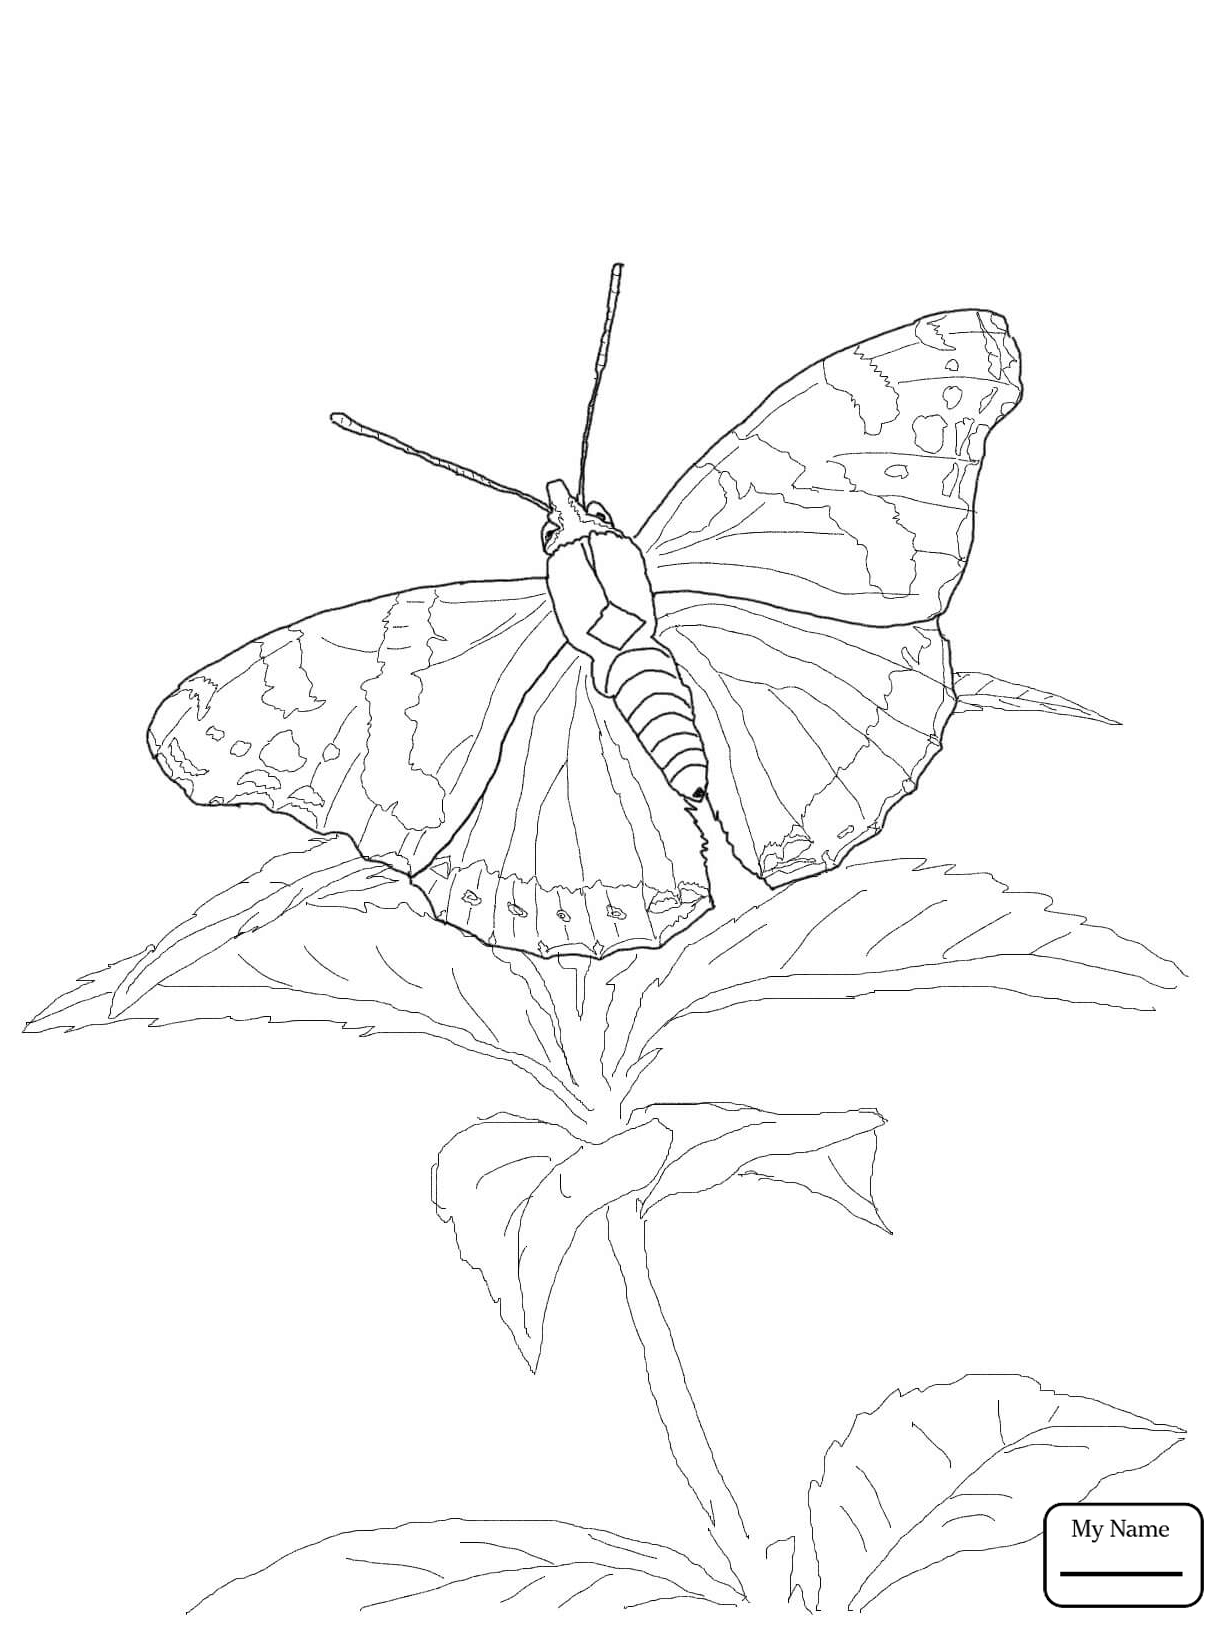 Blue Morpho Butterfly Coloring Page at GetColorings.com | Free ...